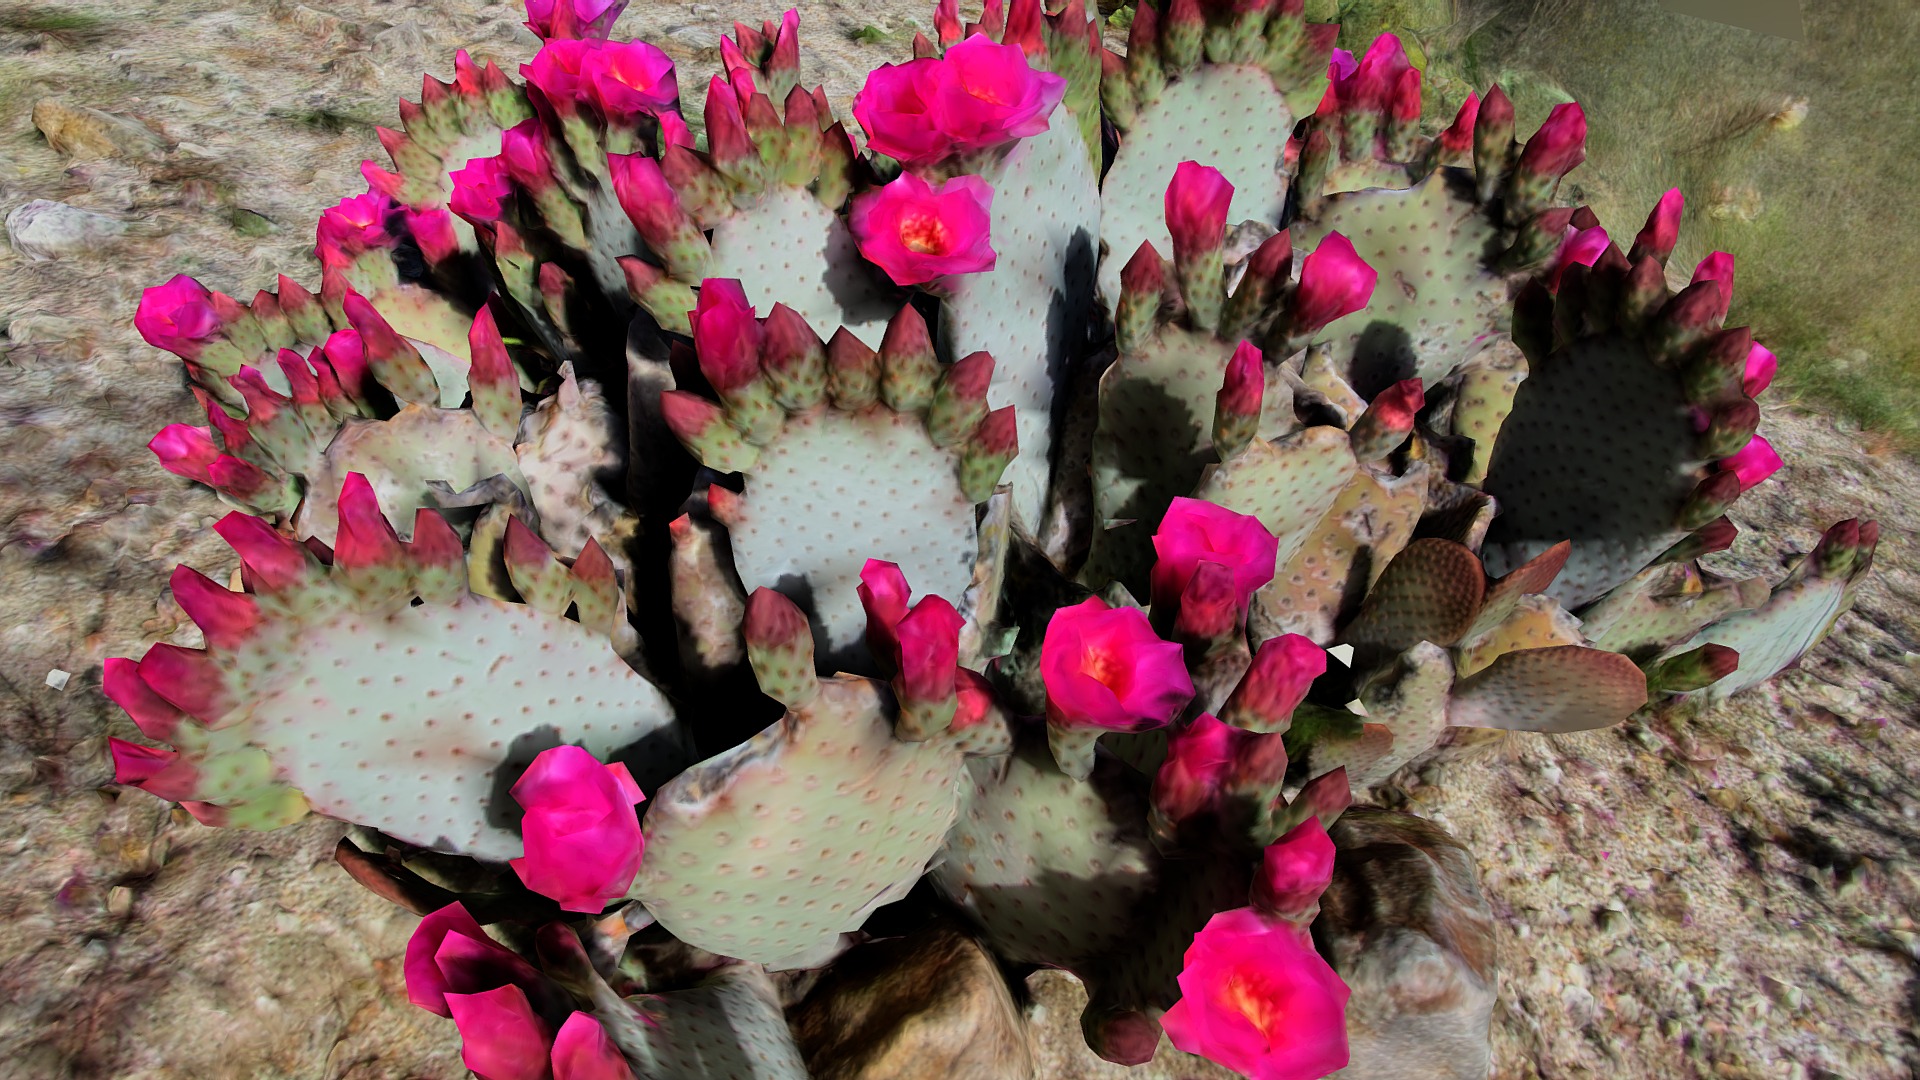 3D model Beavertail Cactus - This is a 3D model of the Beavertail Cactus. The 3D model is about a group of flowers.